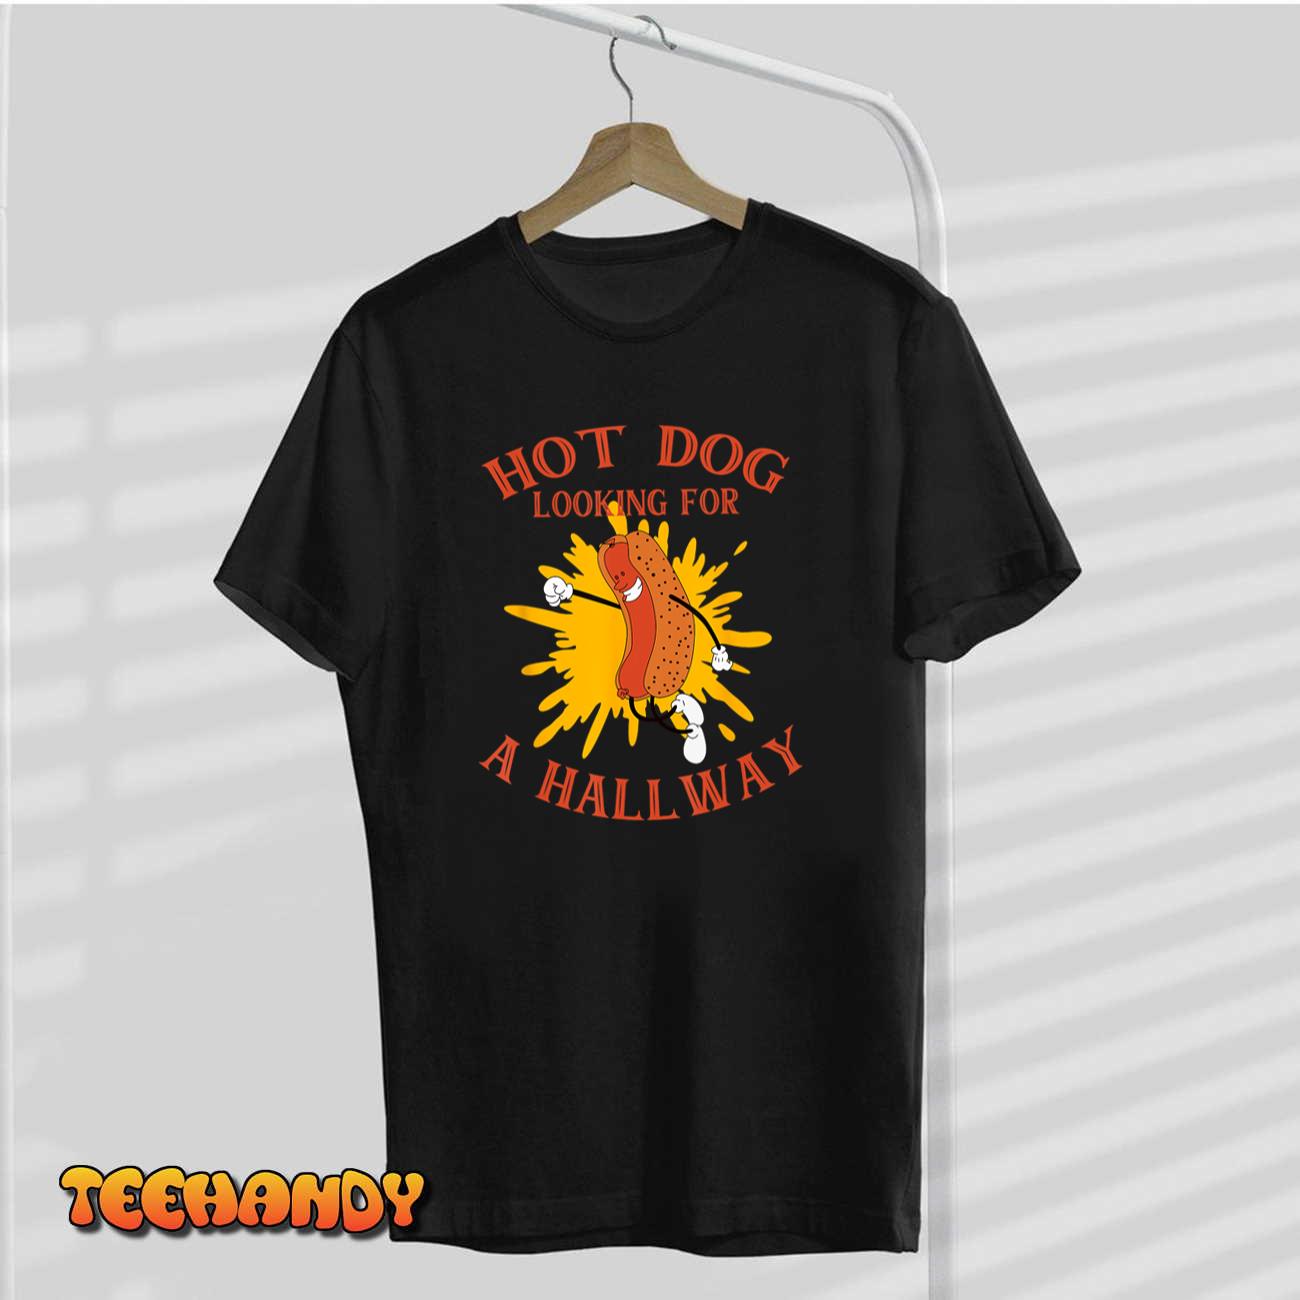 Hot Dog Looking For A Hallway Apparel T-Shirt